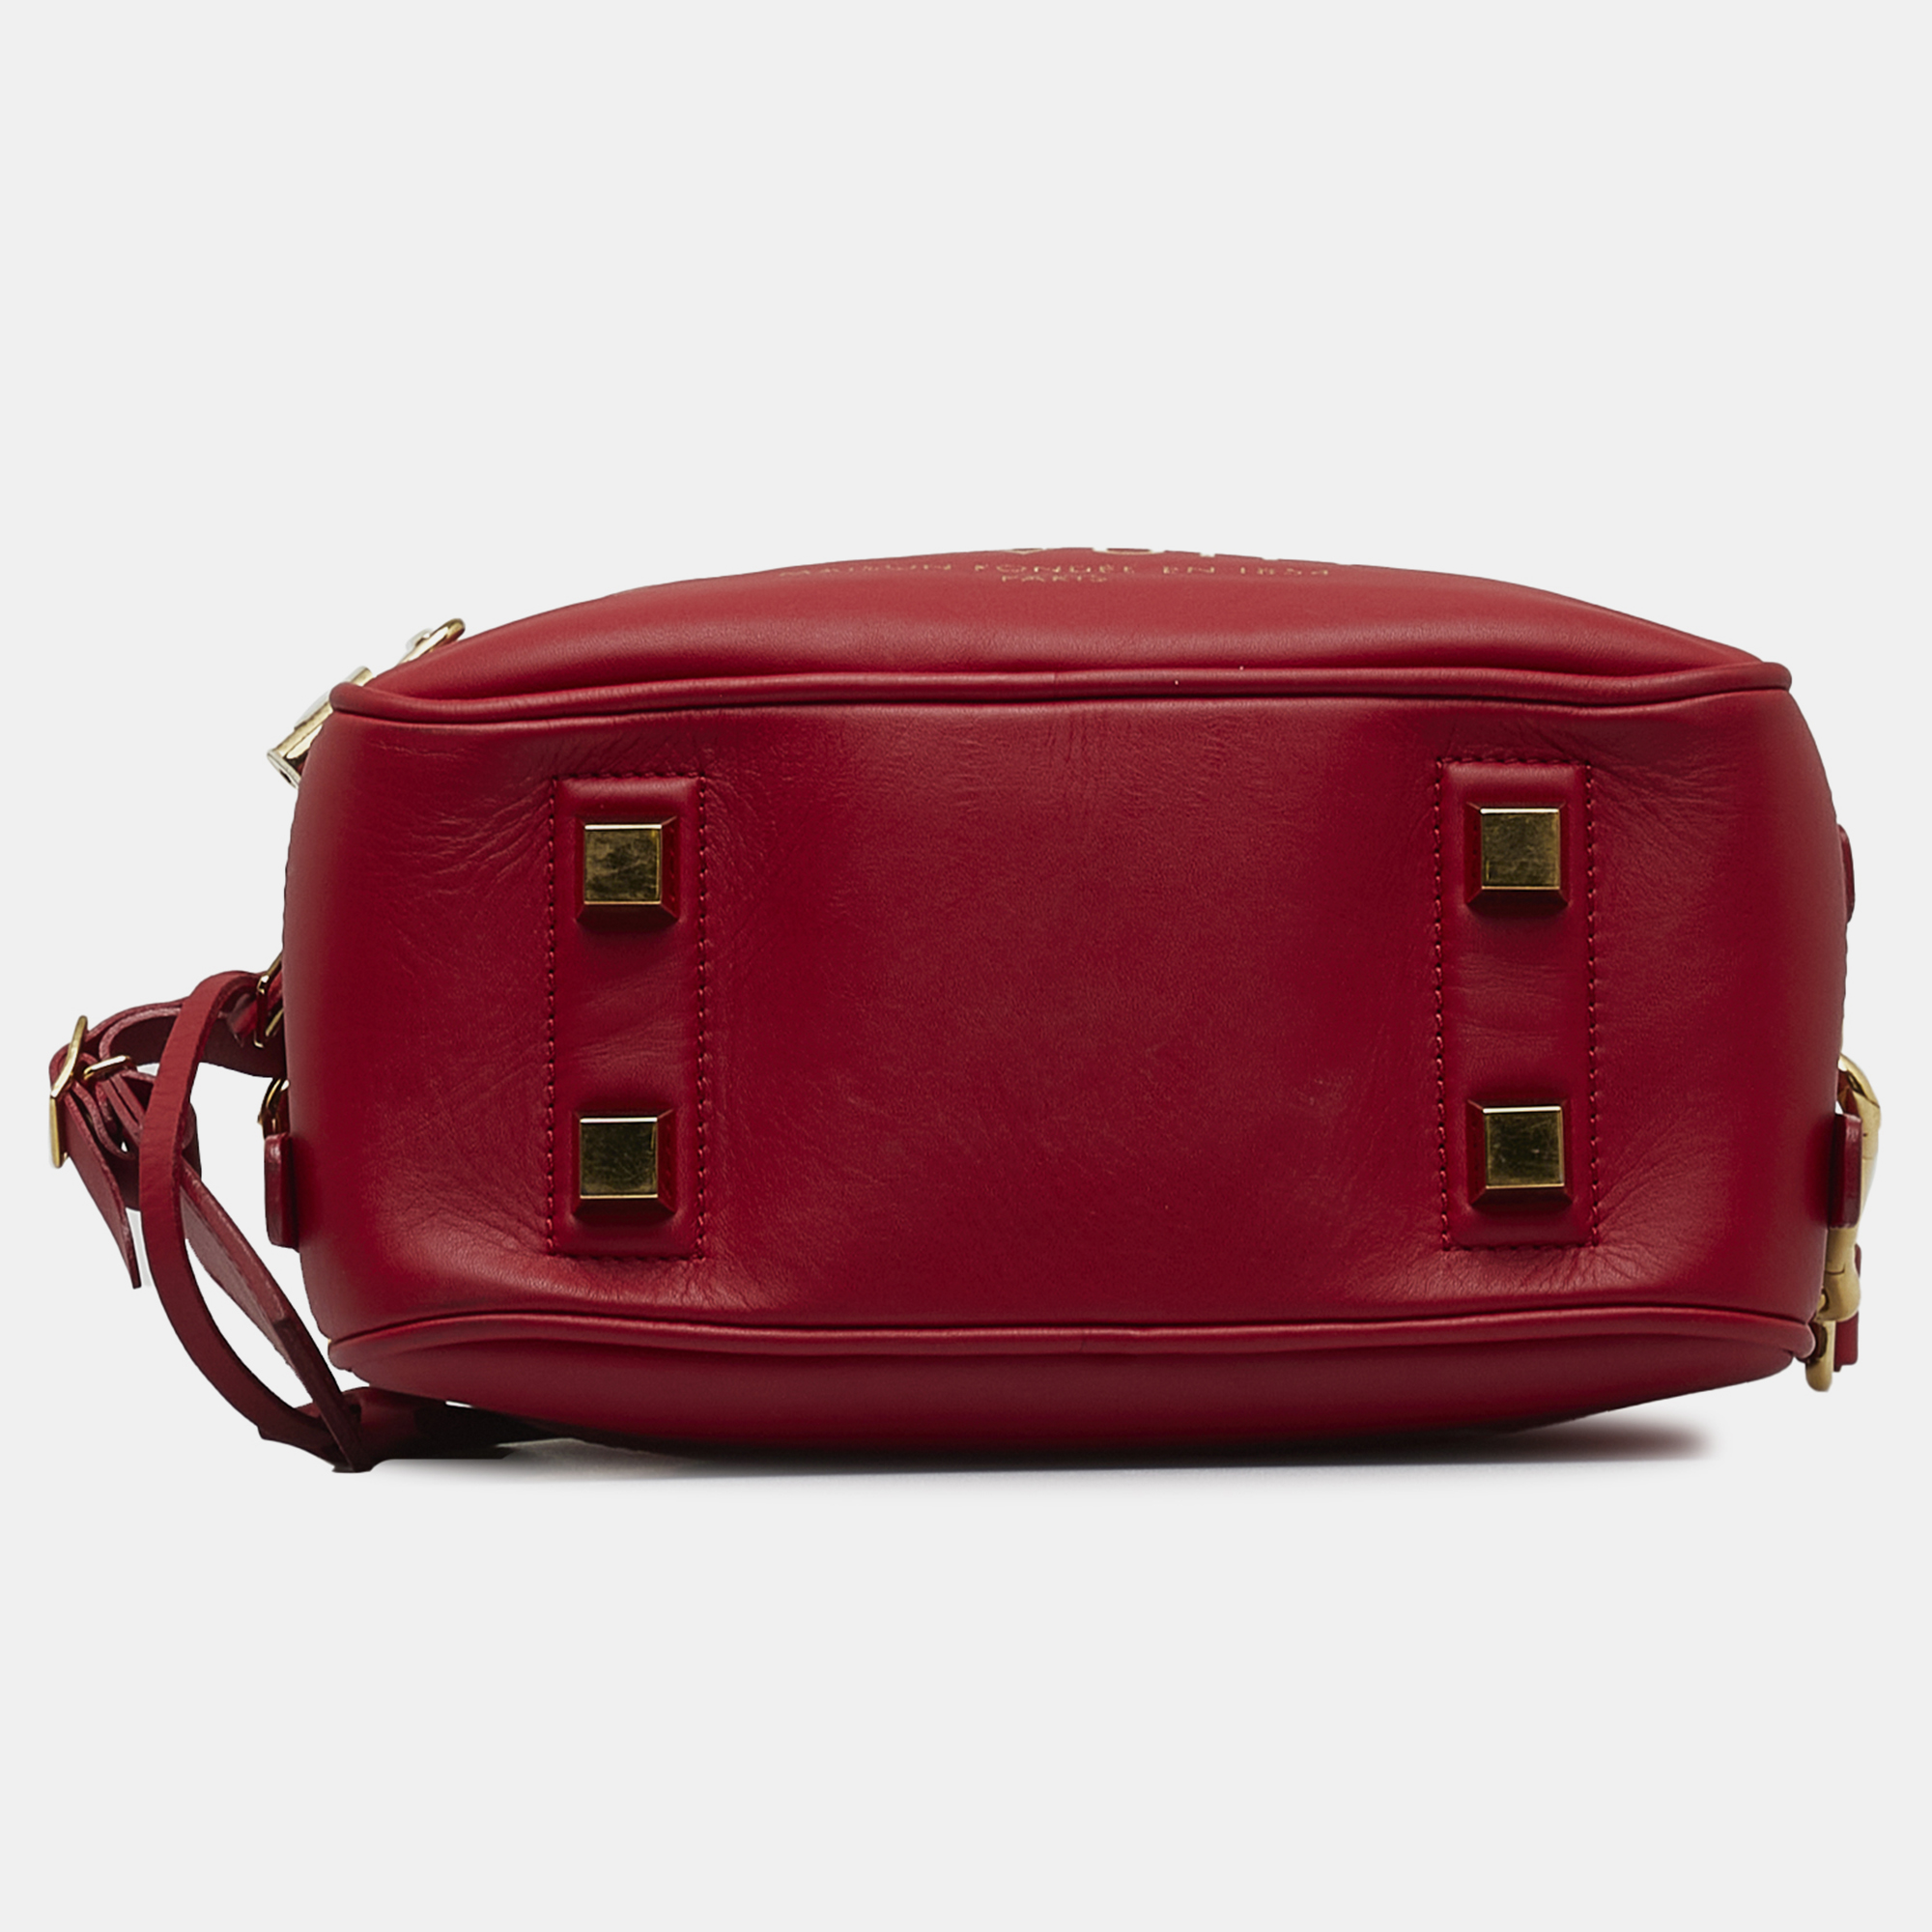 Louis Vuitton Red Leather Flight Paname Takeoff Bag